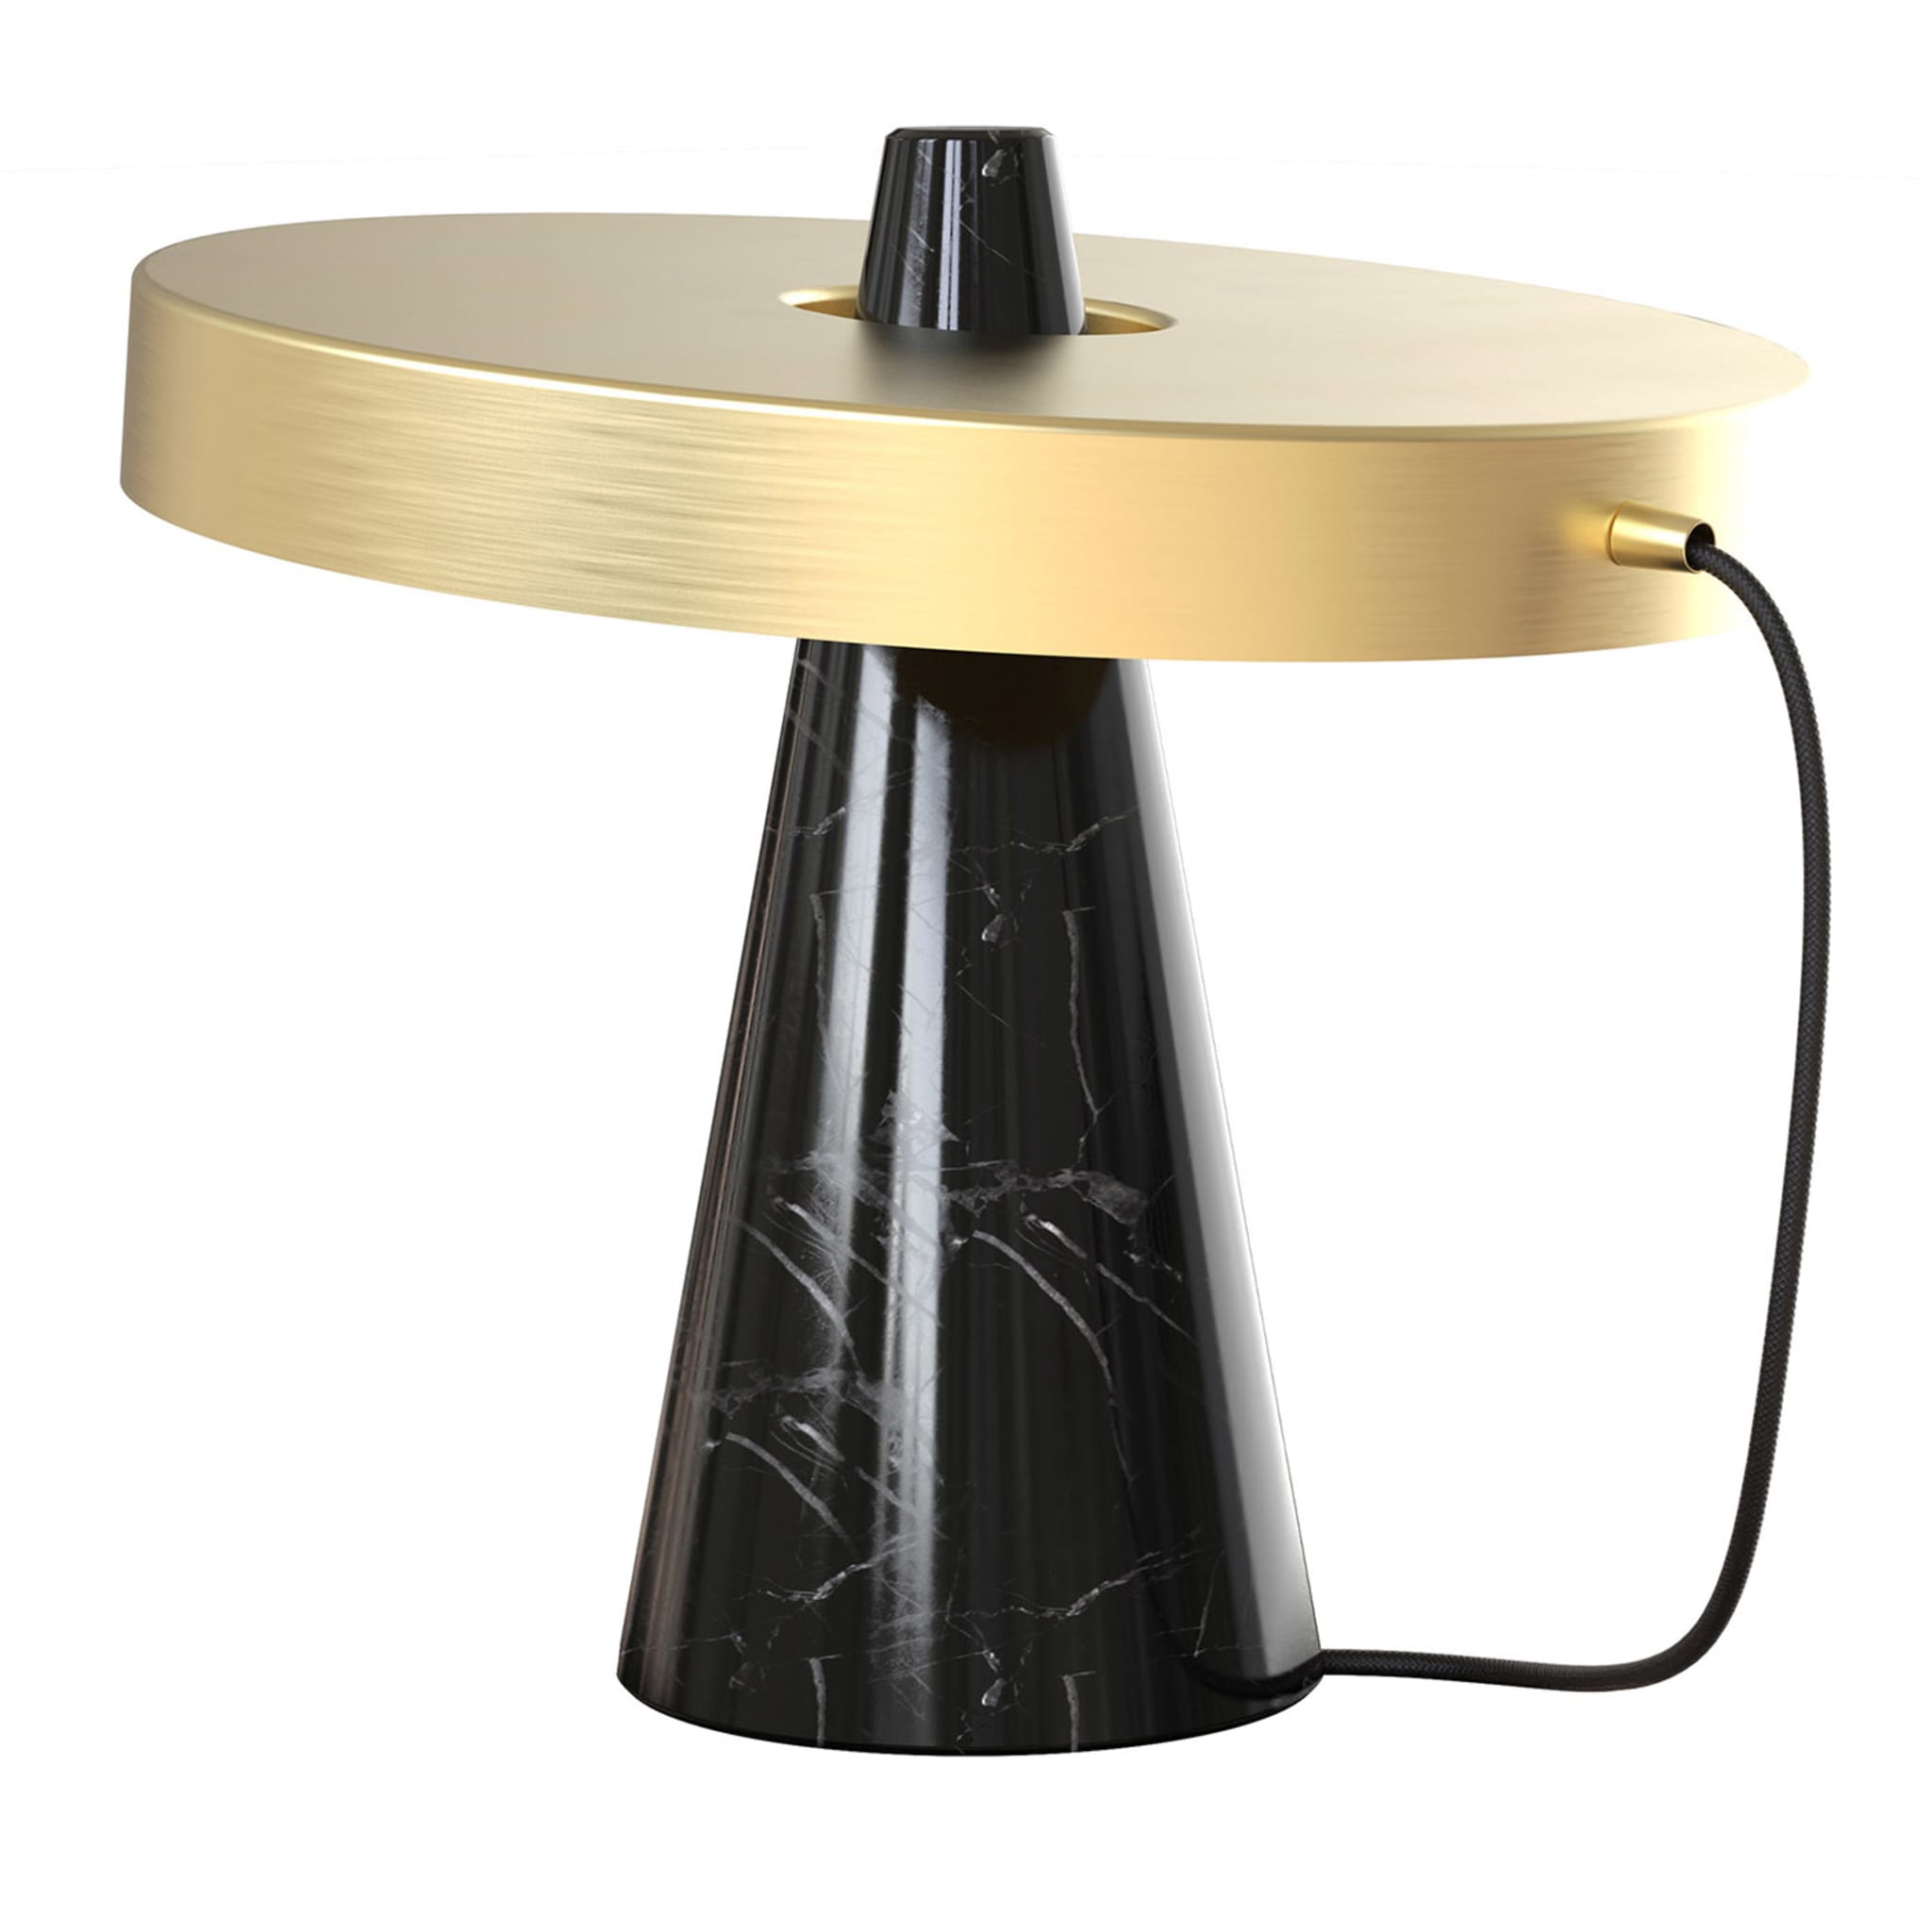 ED039 Black Stone and Brass Table Lamp - Main view